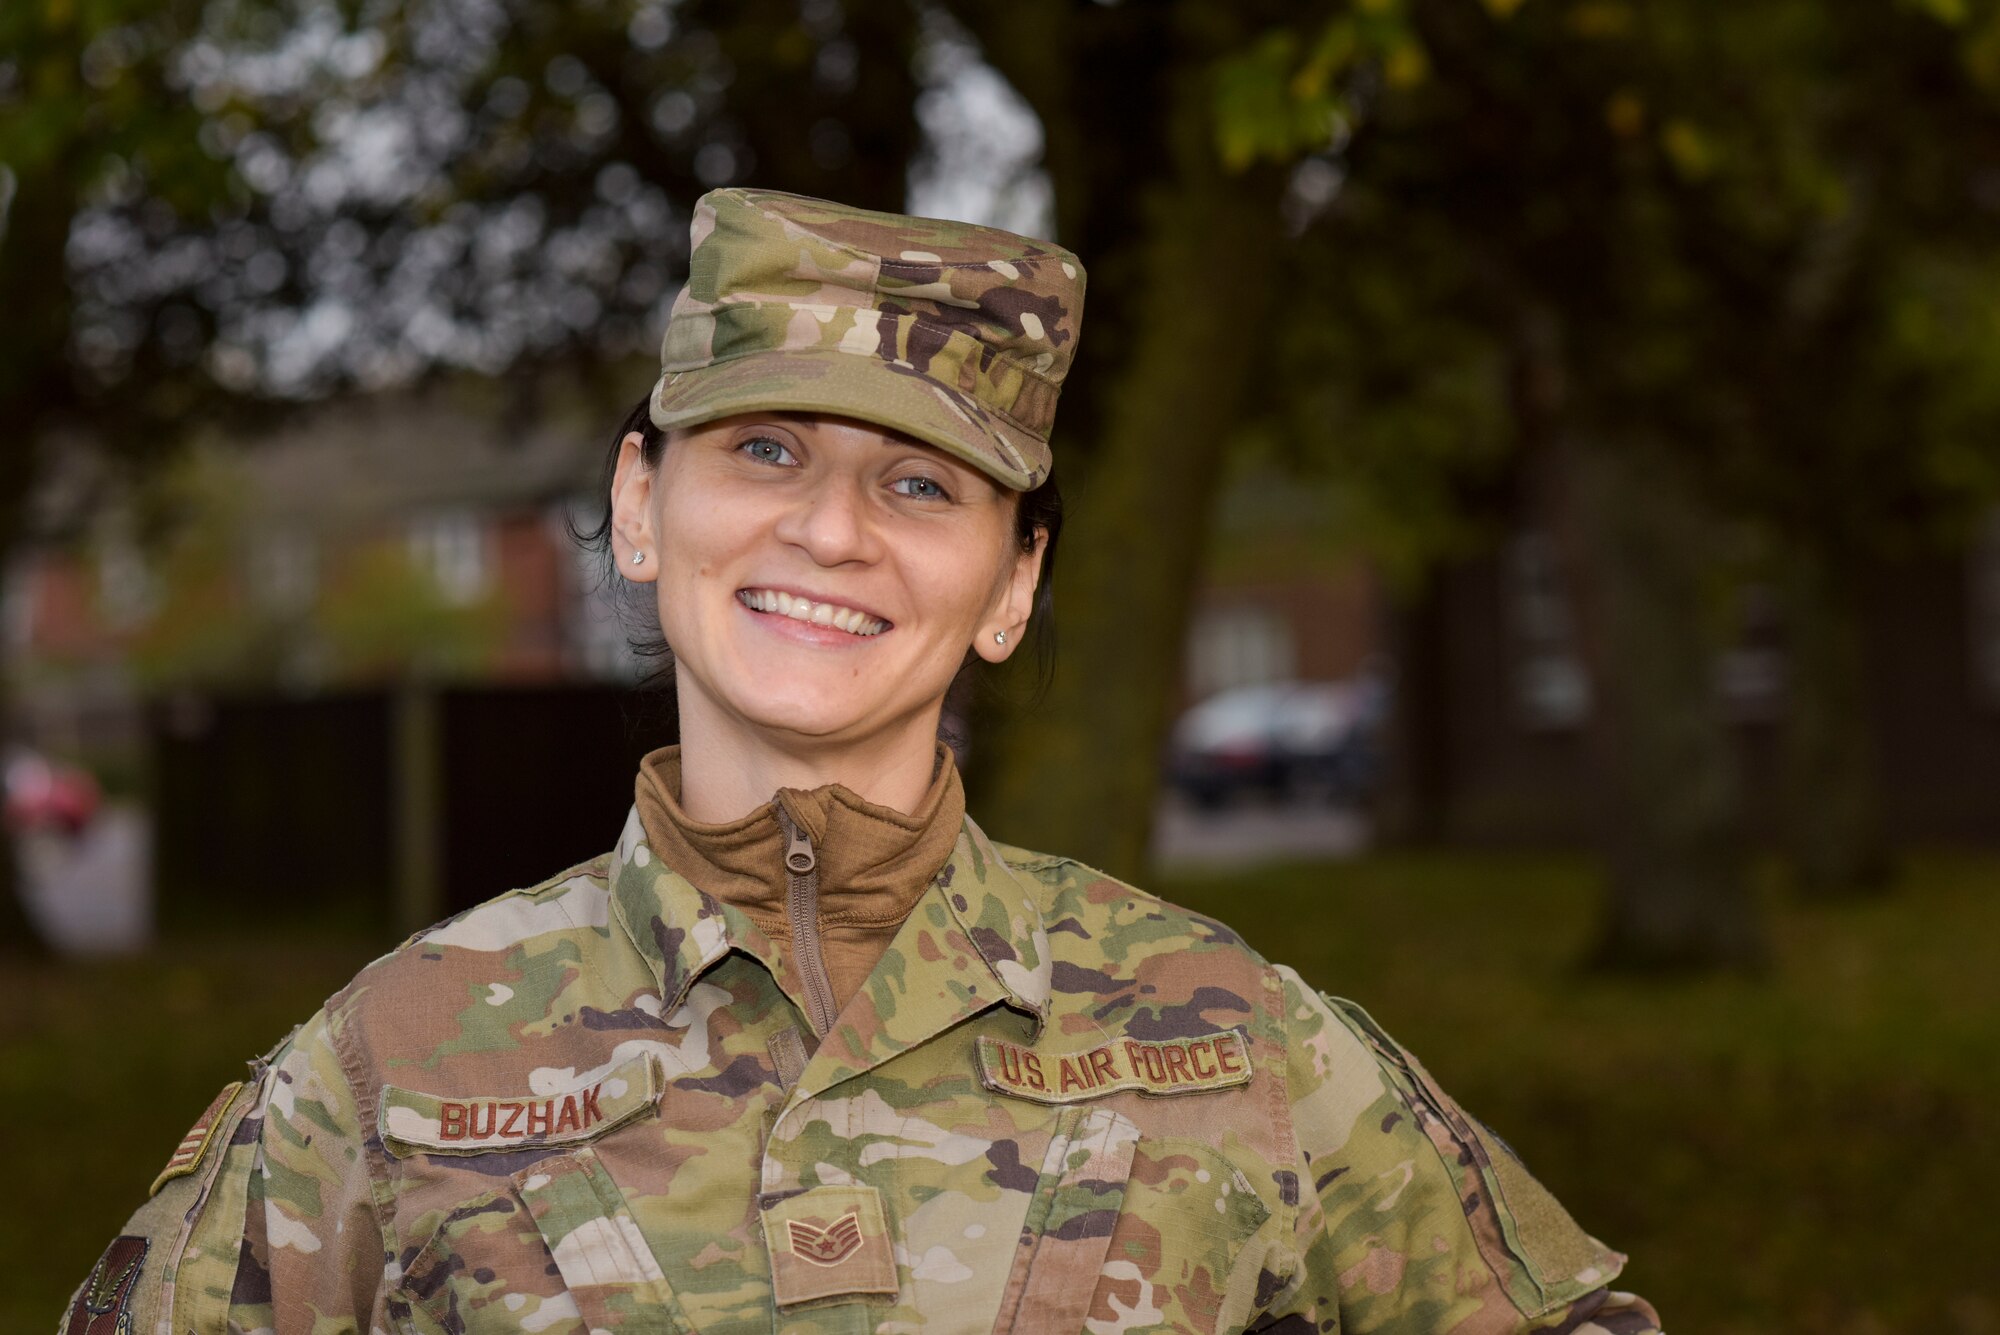 U.S. Air Force Staff Sgt. Olga Buzhak, 352nd Special Operations Wing financial analyst, poses for a picture at RAF Mildenhall, England, Oct.27,2019. Buzhak traveled from her birth place of Minsk, Belarus - not to leave a war-ridden country or to escape poverty- but simply to see a different, better life and a new experience in America. (U.S. Air Force photo by Senior Airman Alexandria Lee)